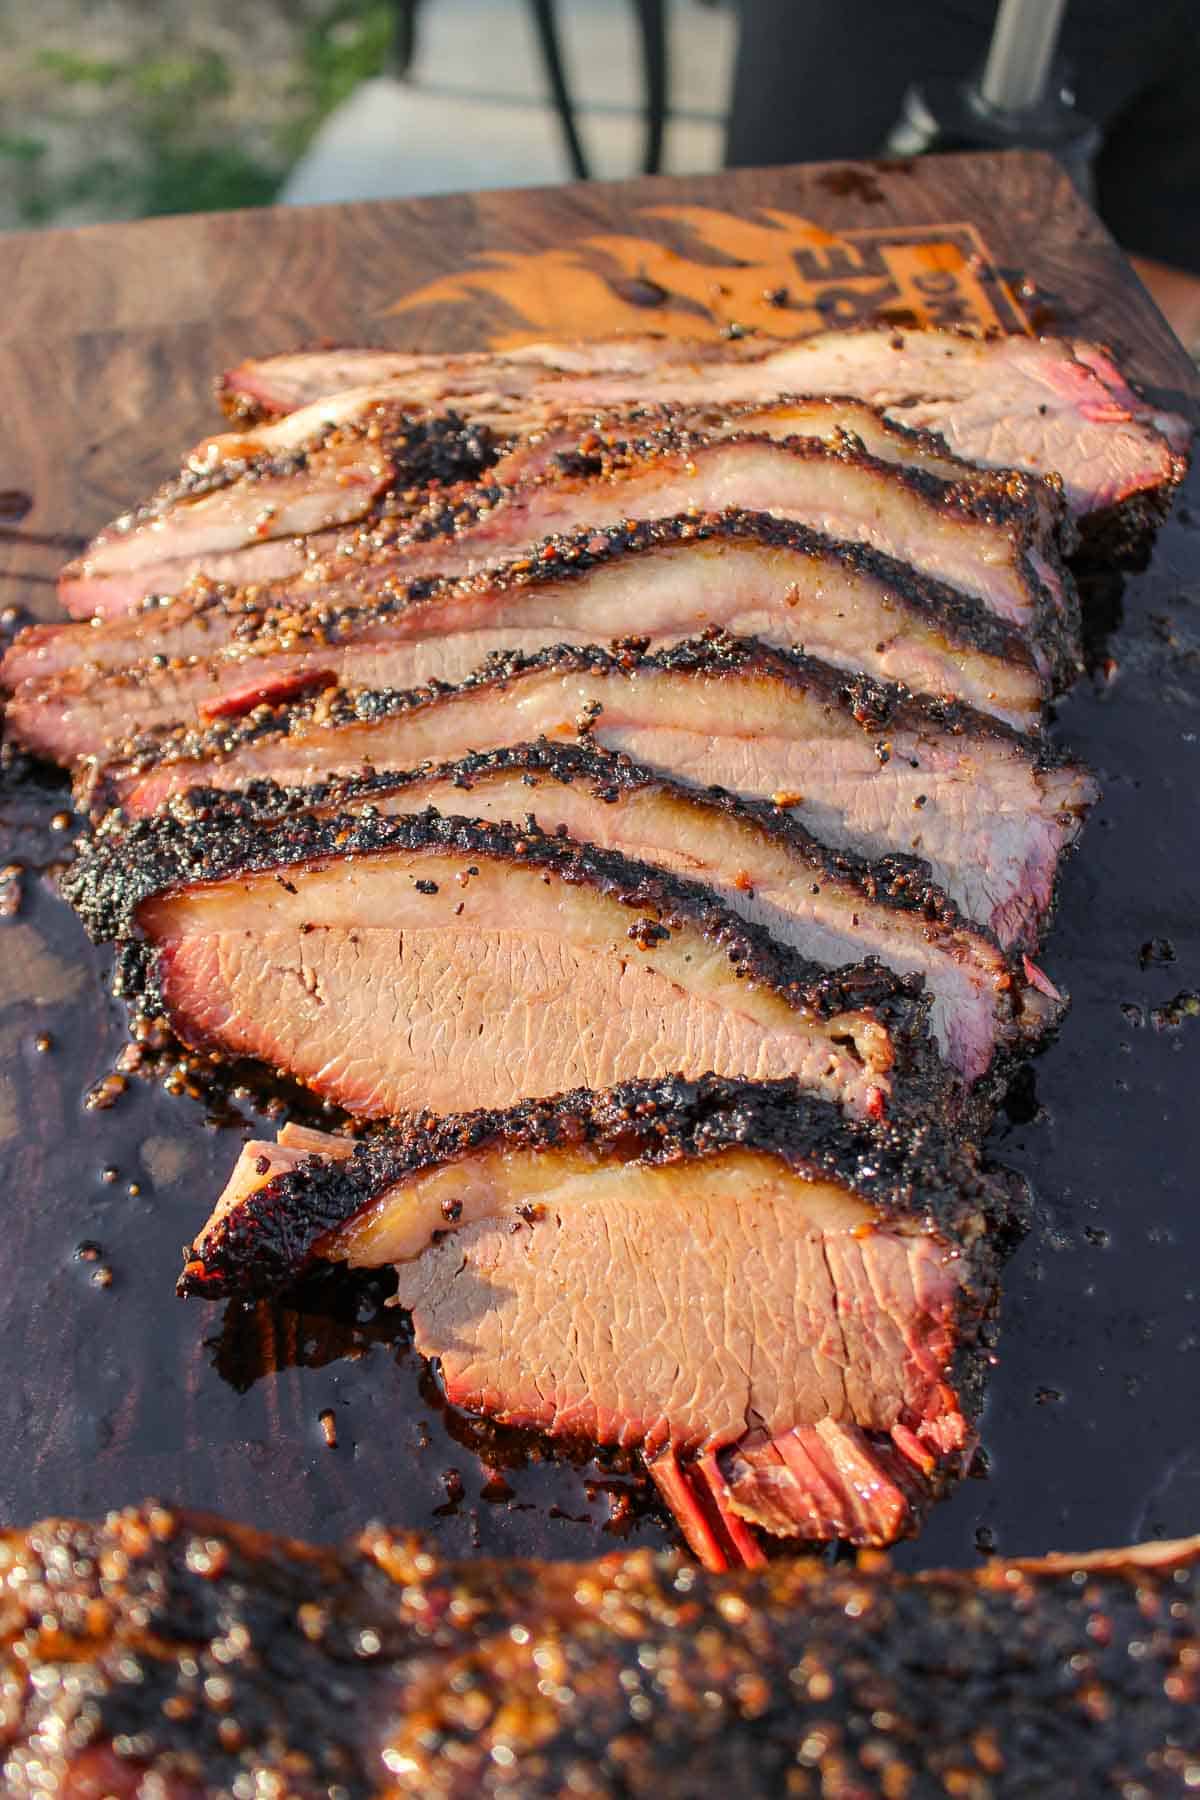 Overnight smoked brisket that melts in your mouth is sliced and served. 